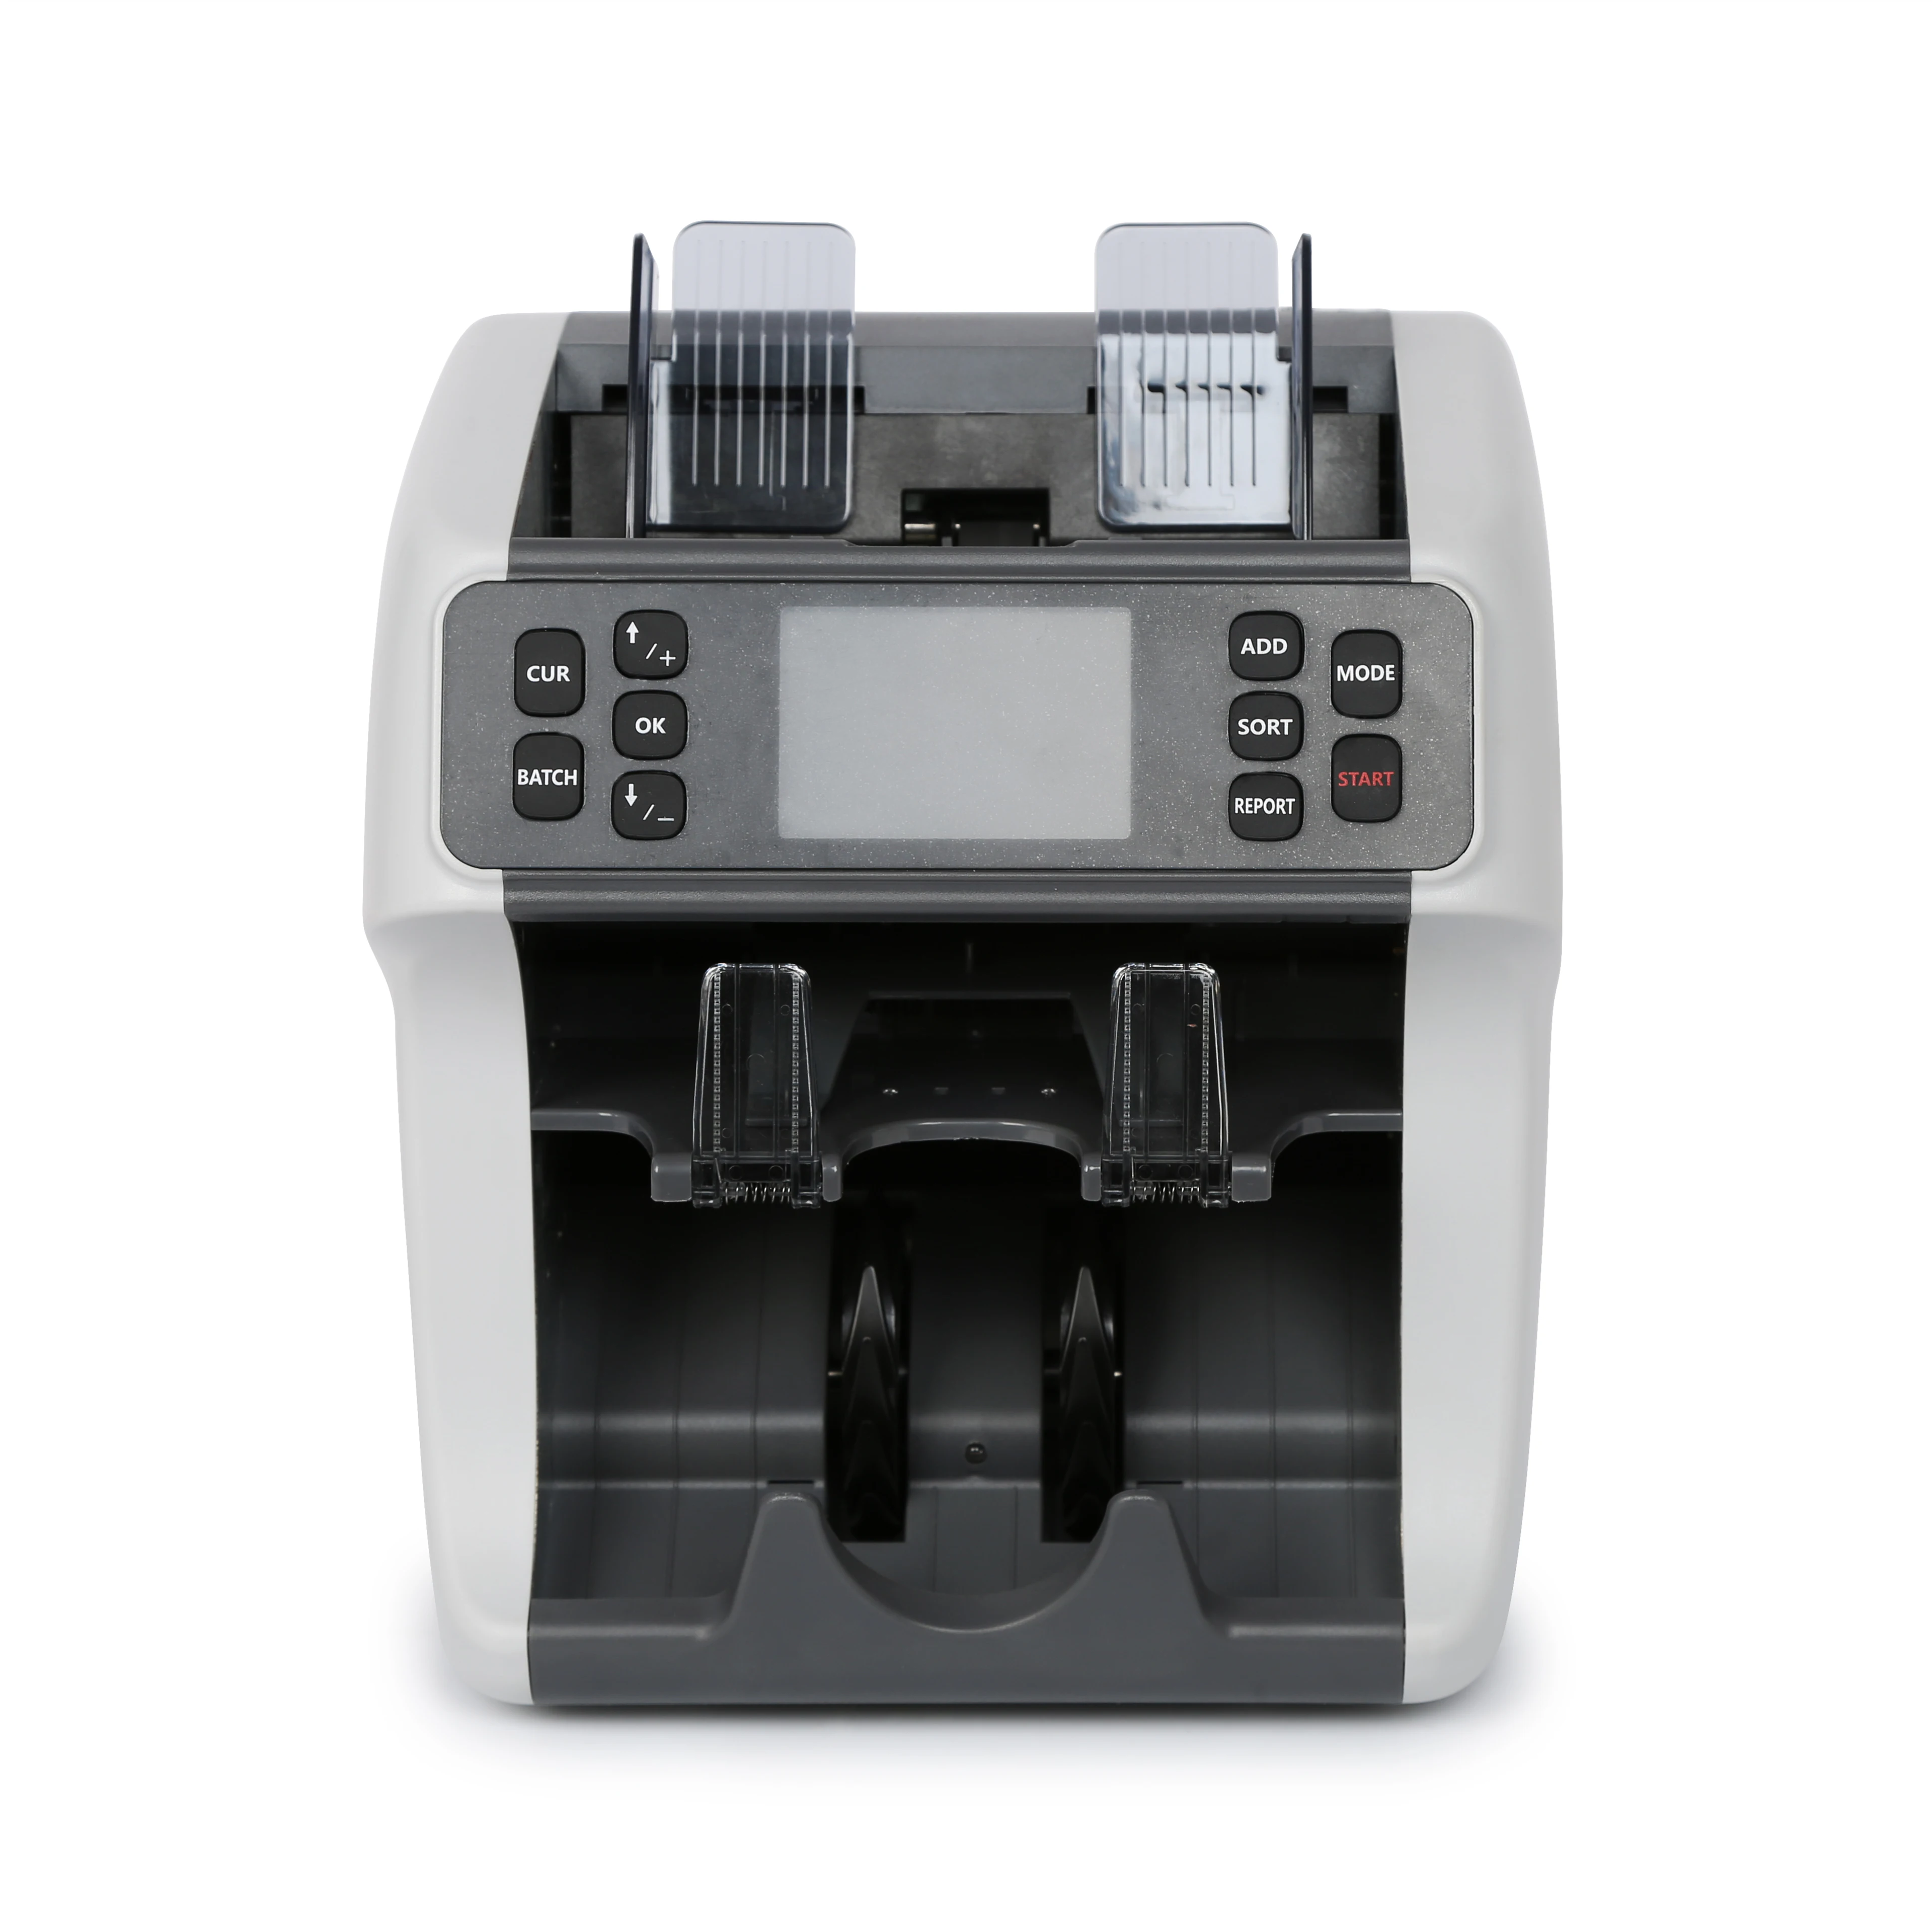 
Financial equipment Two pocket money note Multi Currency mix value counting sorter machine SH-08C 